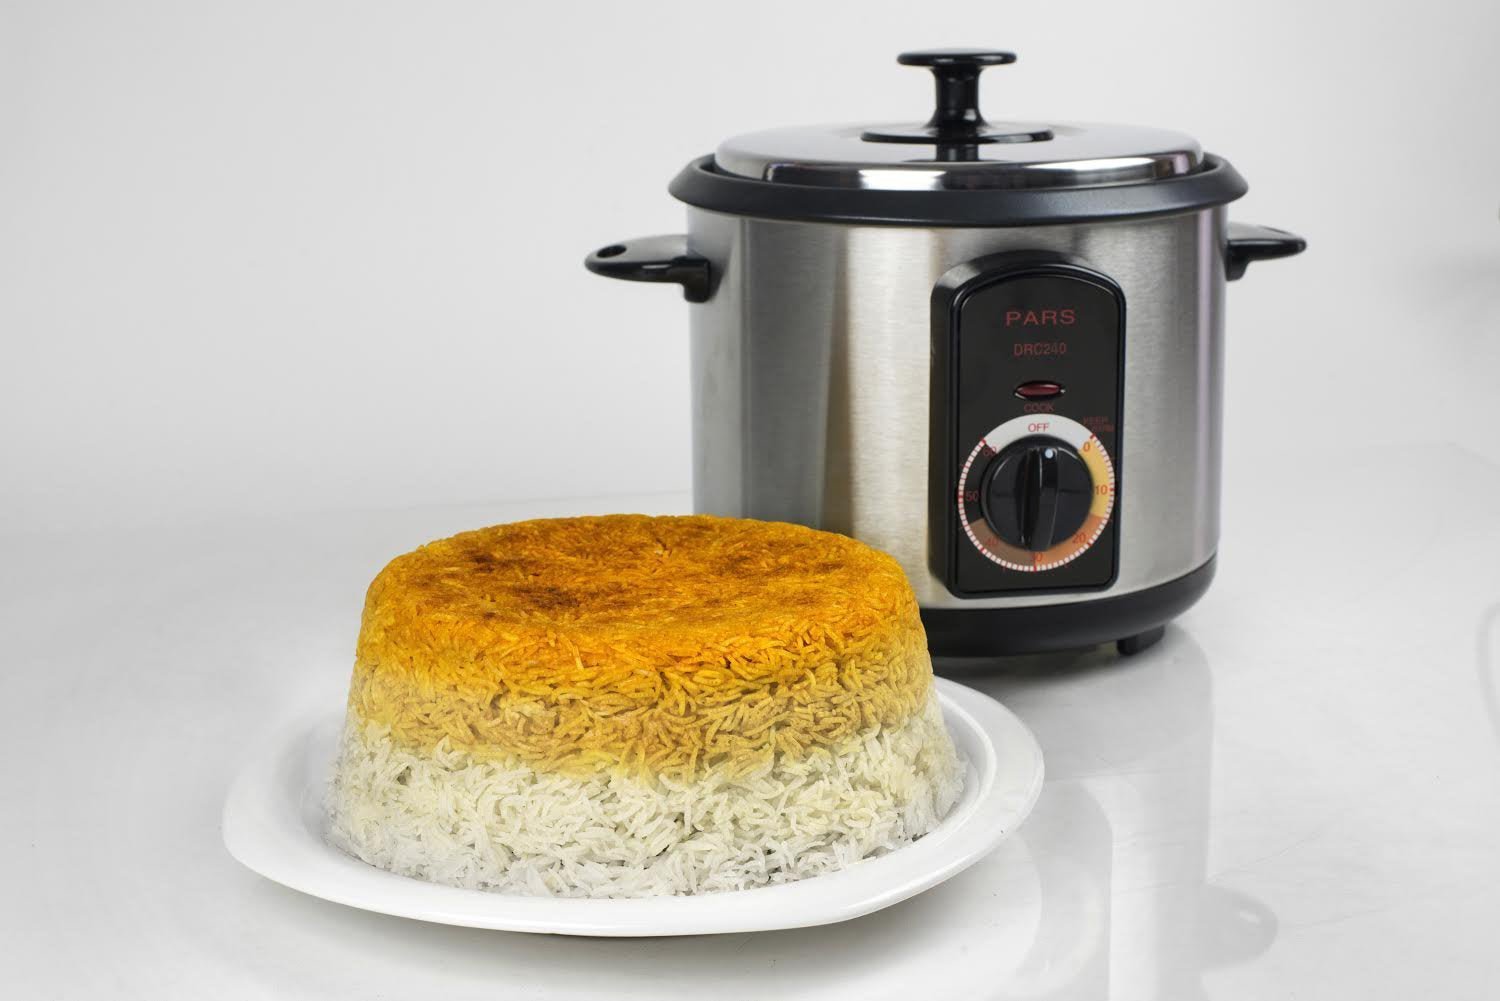 Pars 3 Cup Automatic Persian Rice Cooker — PARS PERSIAN RICE COOKERS